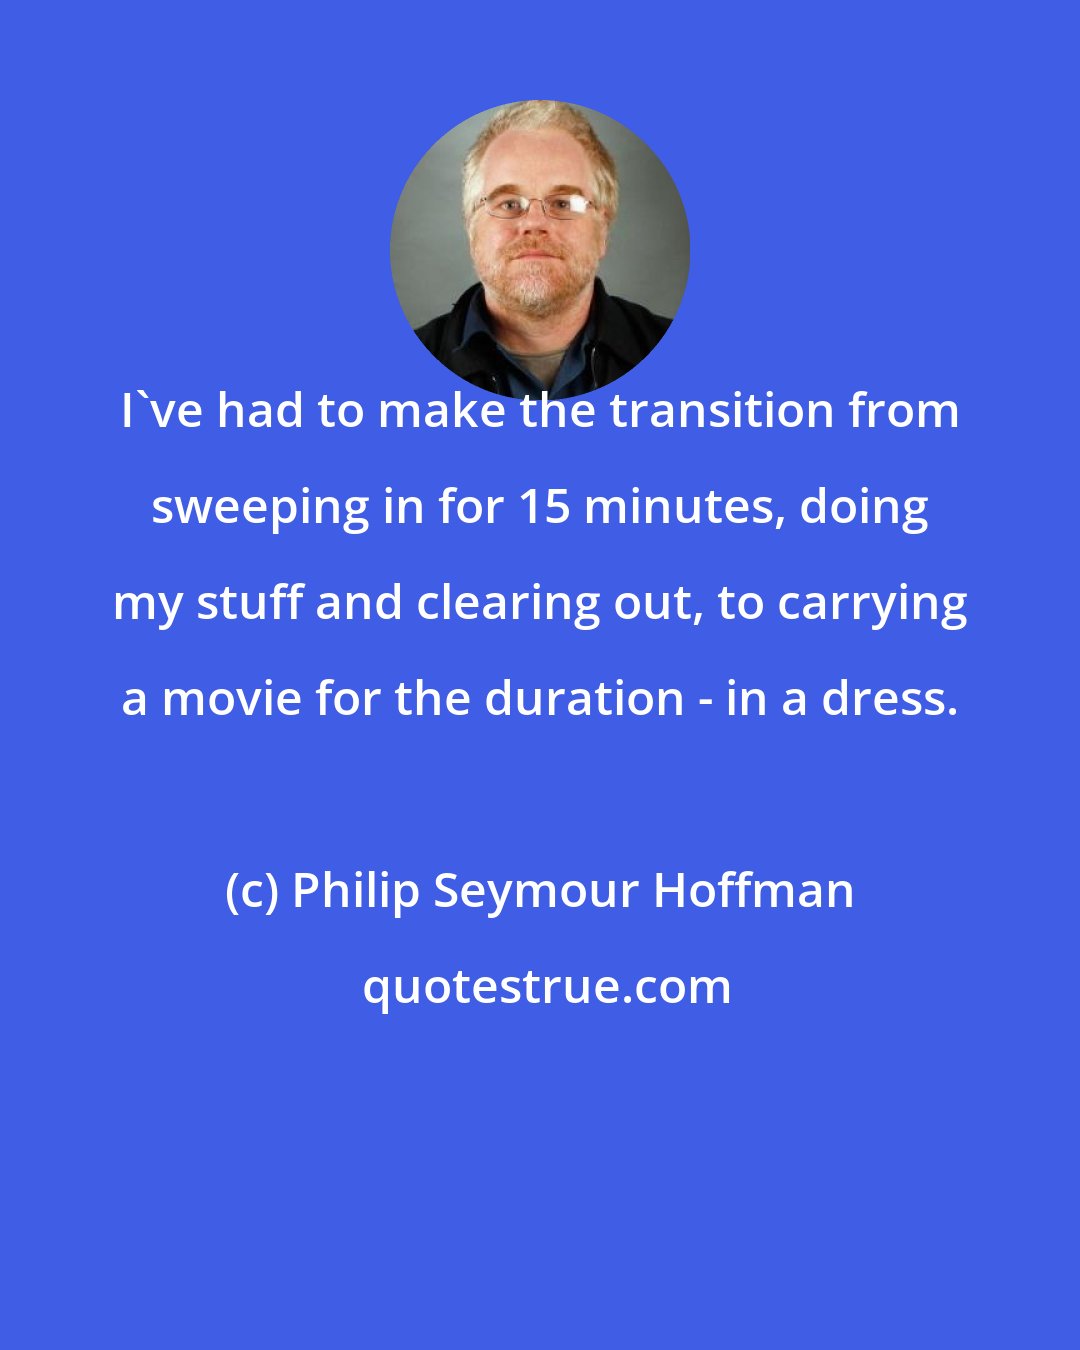 Philip Seymour Hoffman: I've had to make the transition from sweeping in for 15 minutes, doing my stuff and clearing out, to carrying a movie for the duration - in a dress.